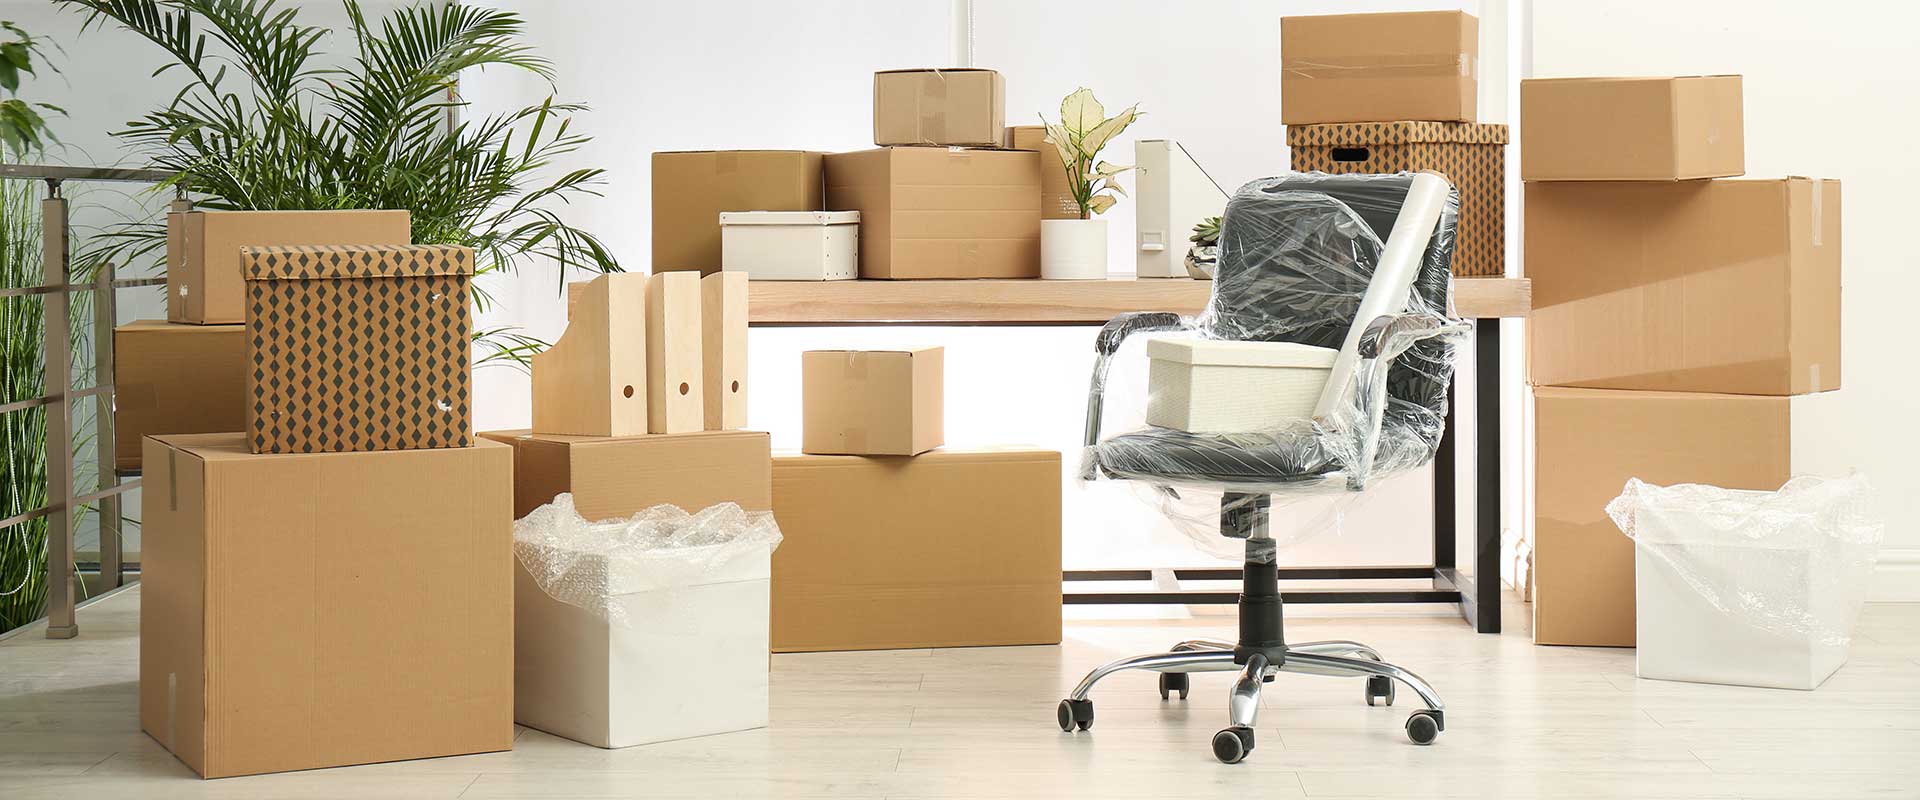 Whats-the-Easiest-Way-to-Pack-for-a-Move